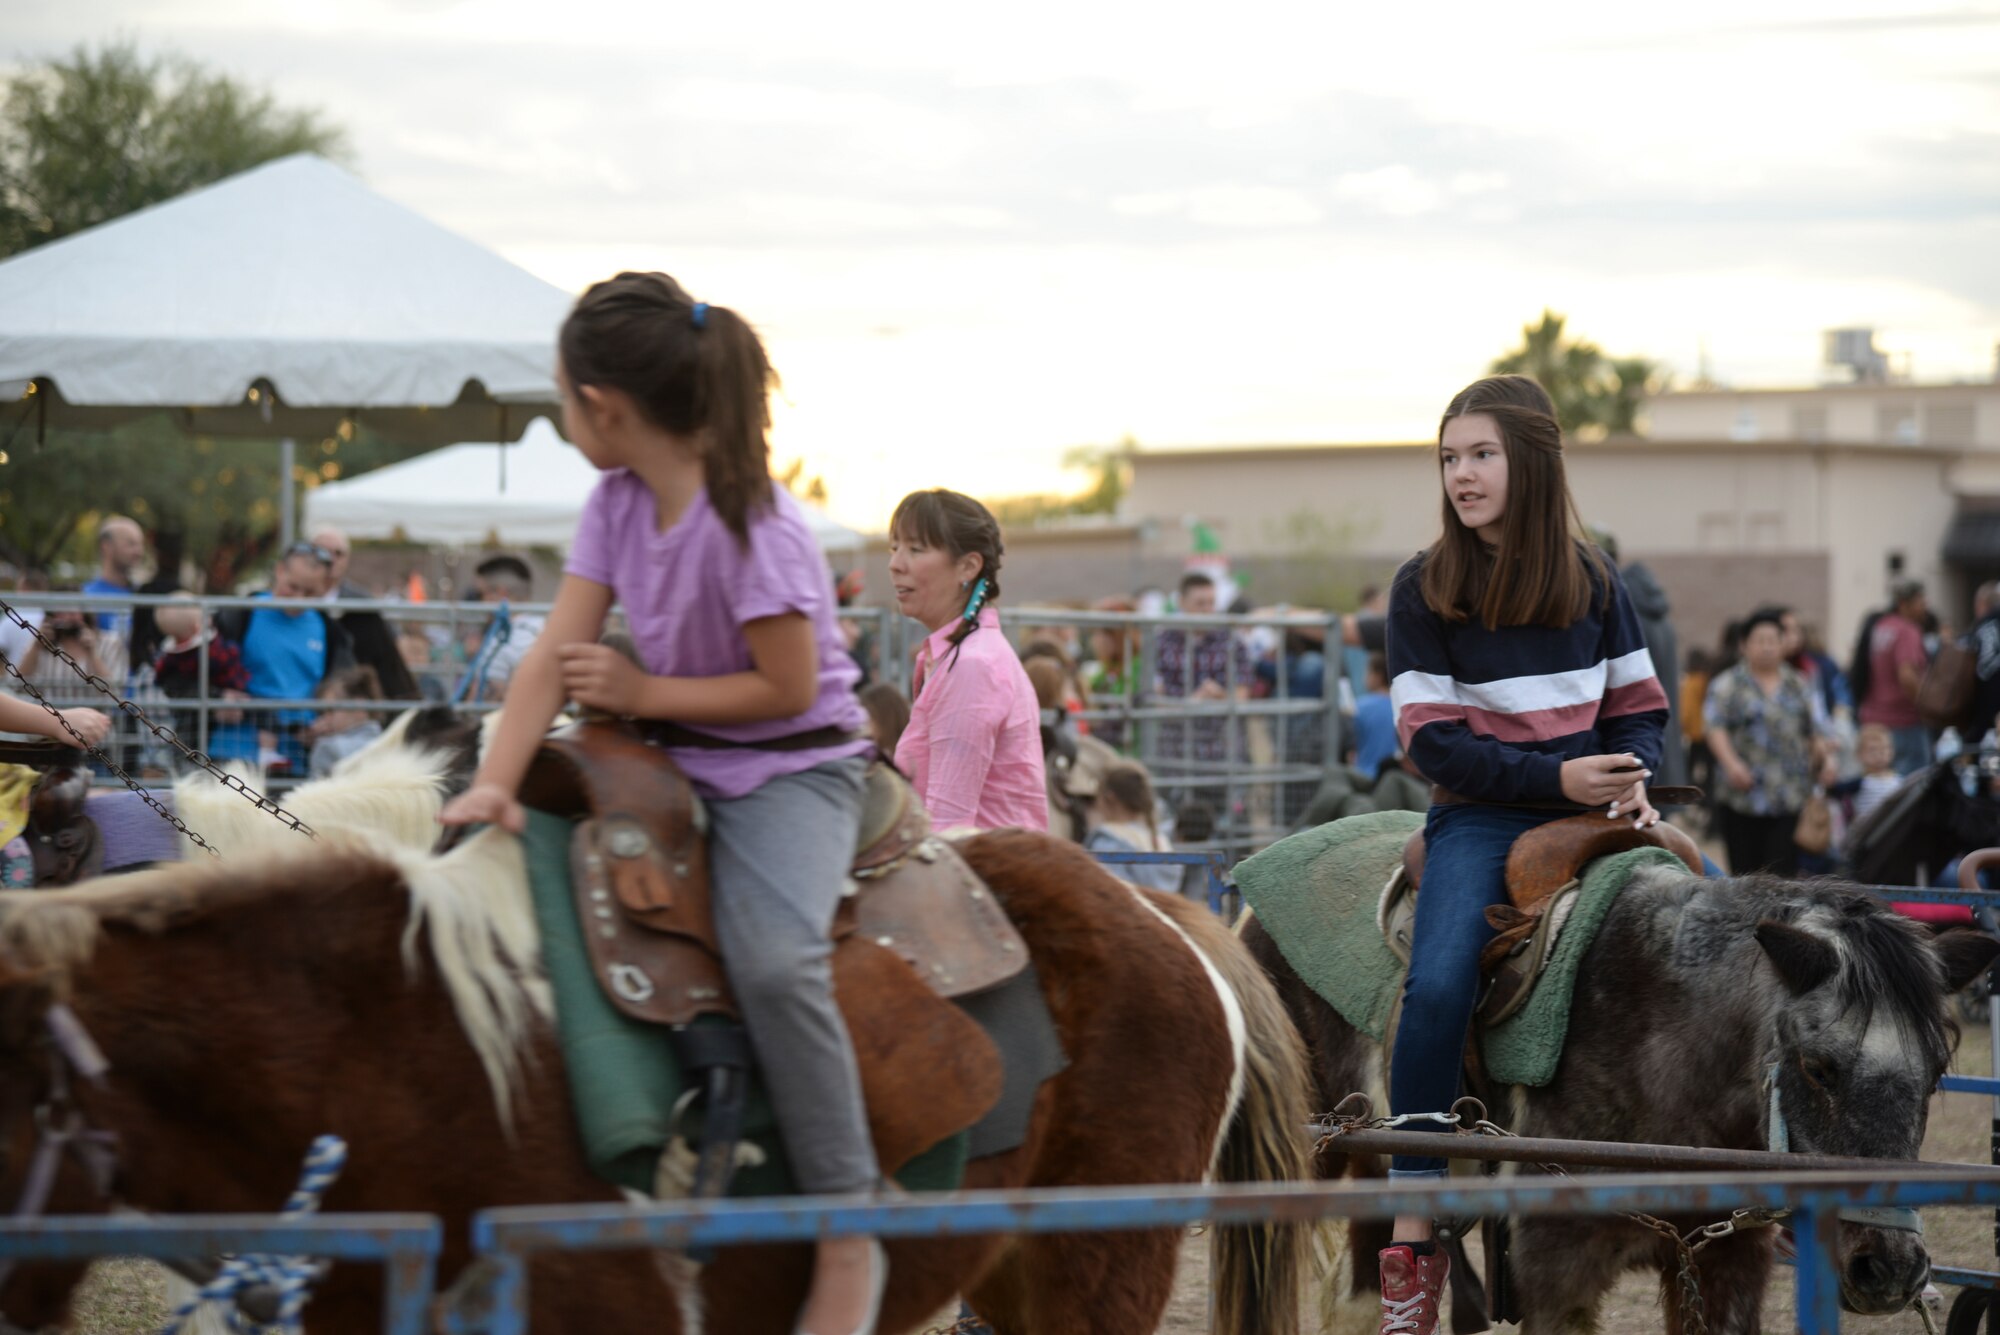 a photo of Children riding horses during a base holiday event.